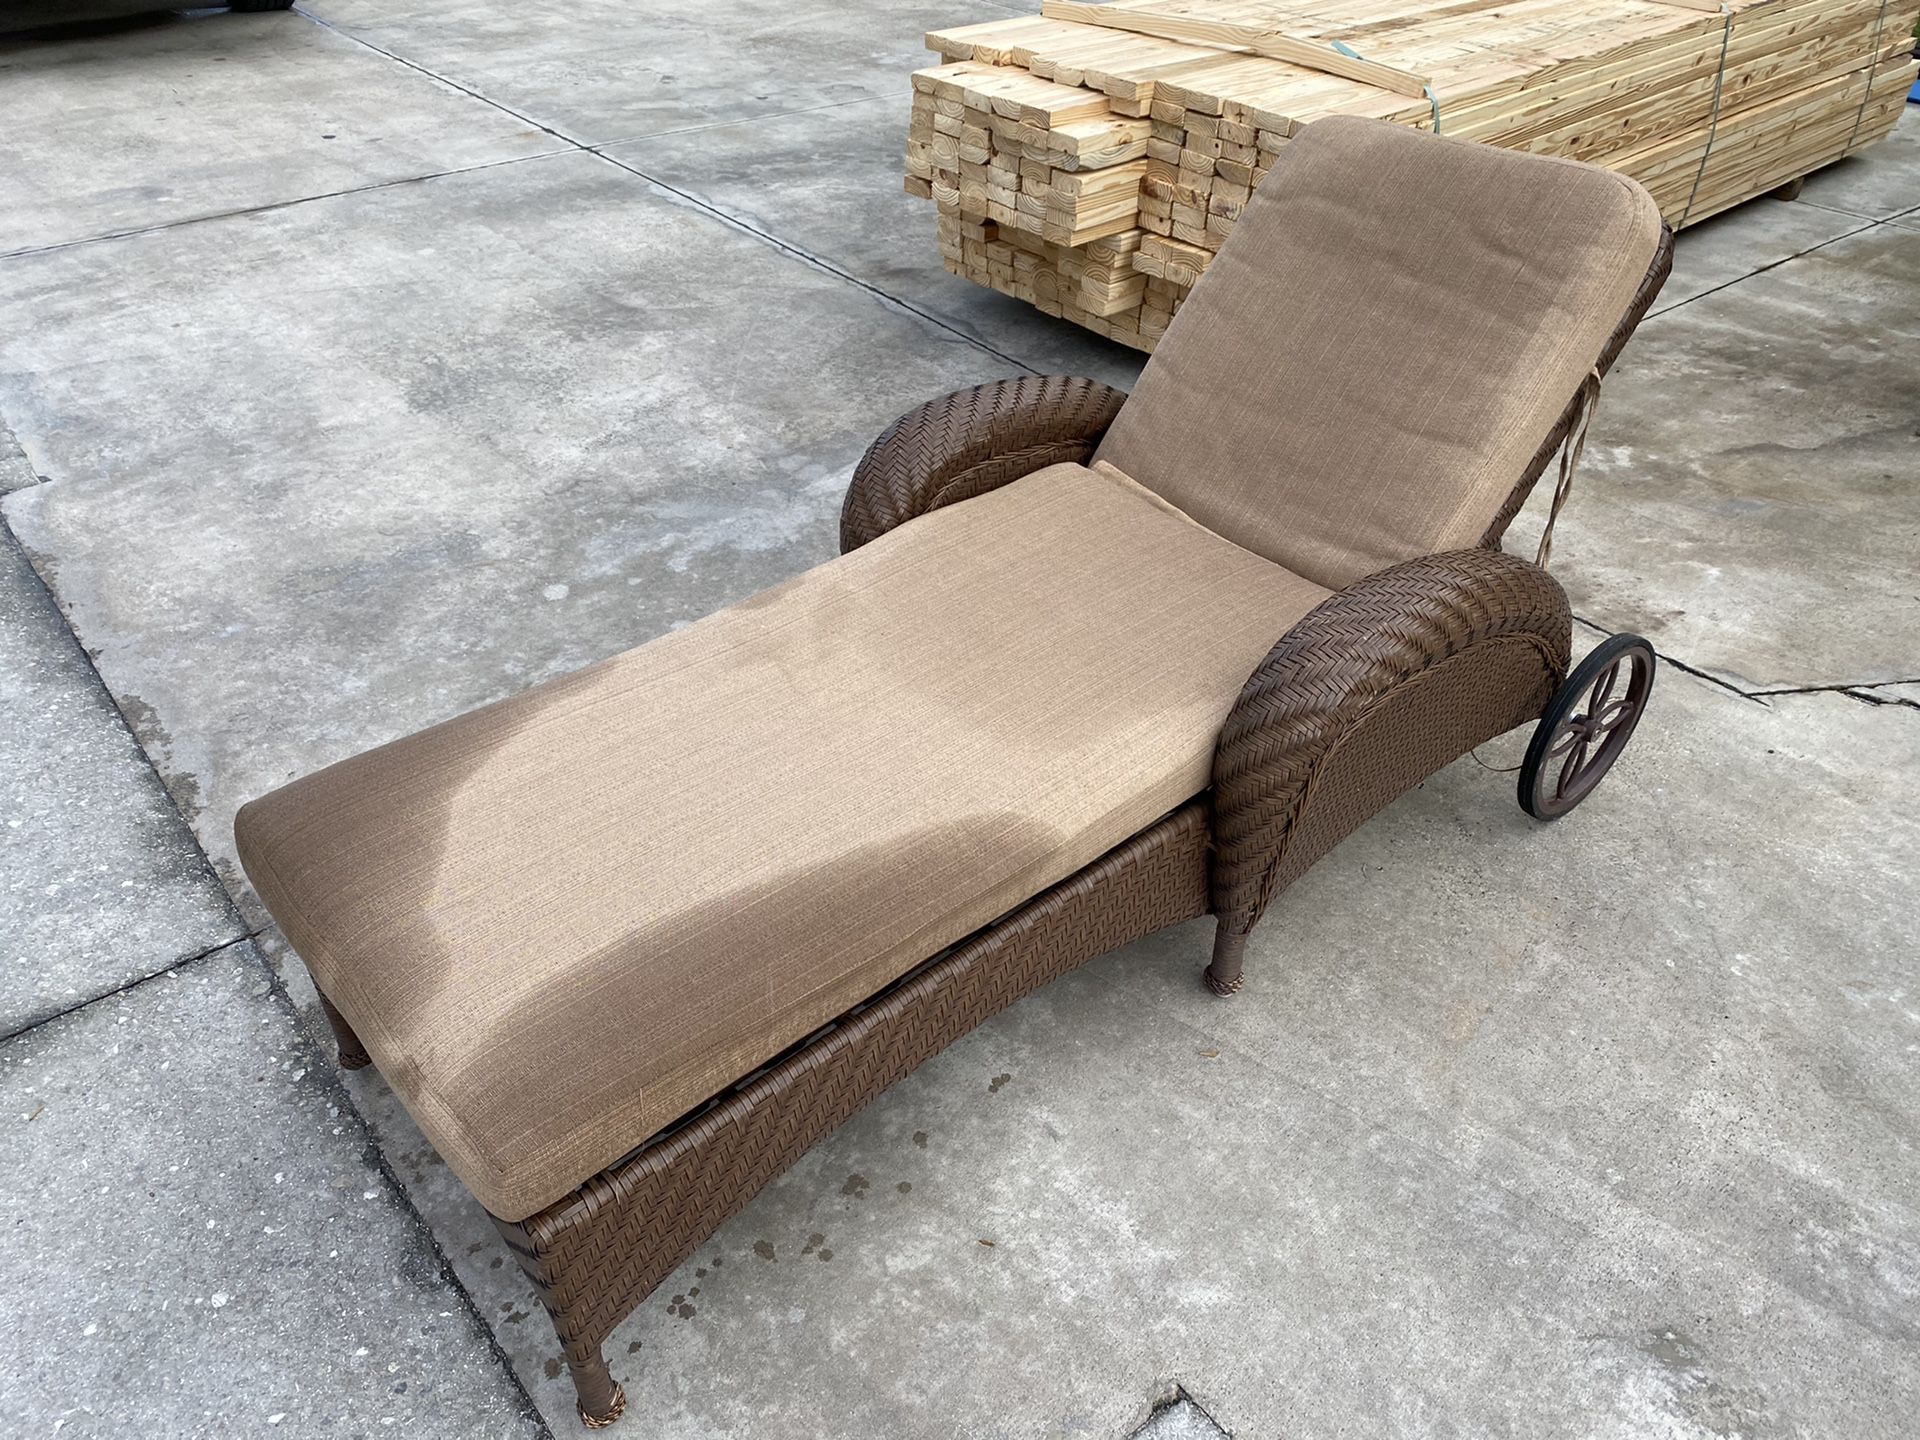 2 Outdoor furniture lounge chairs